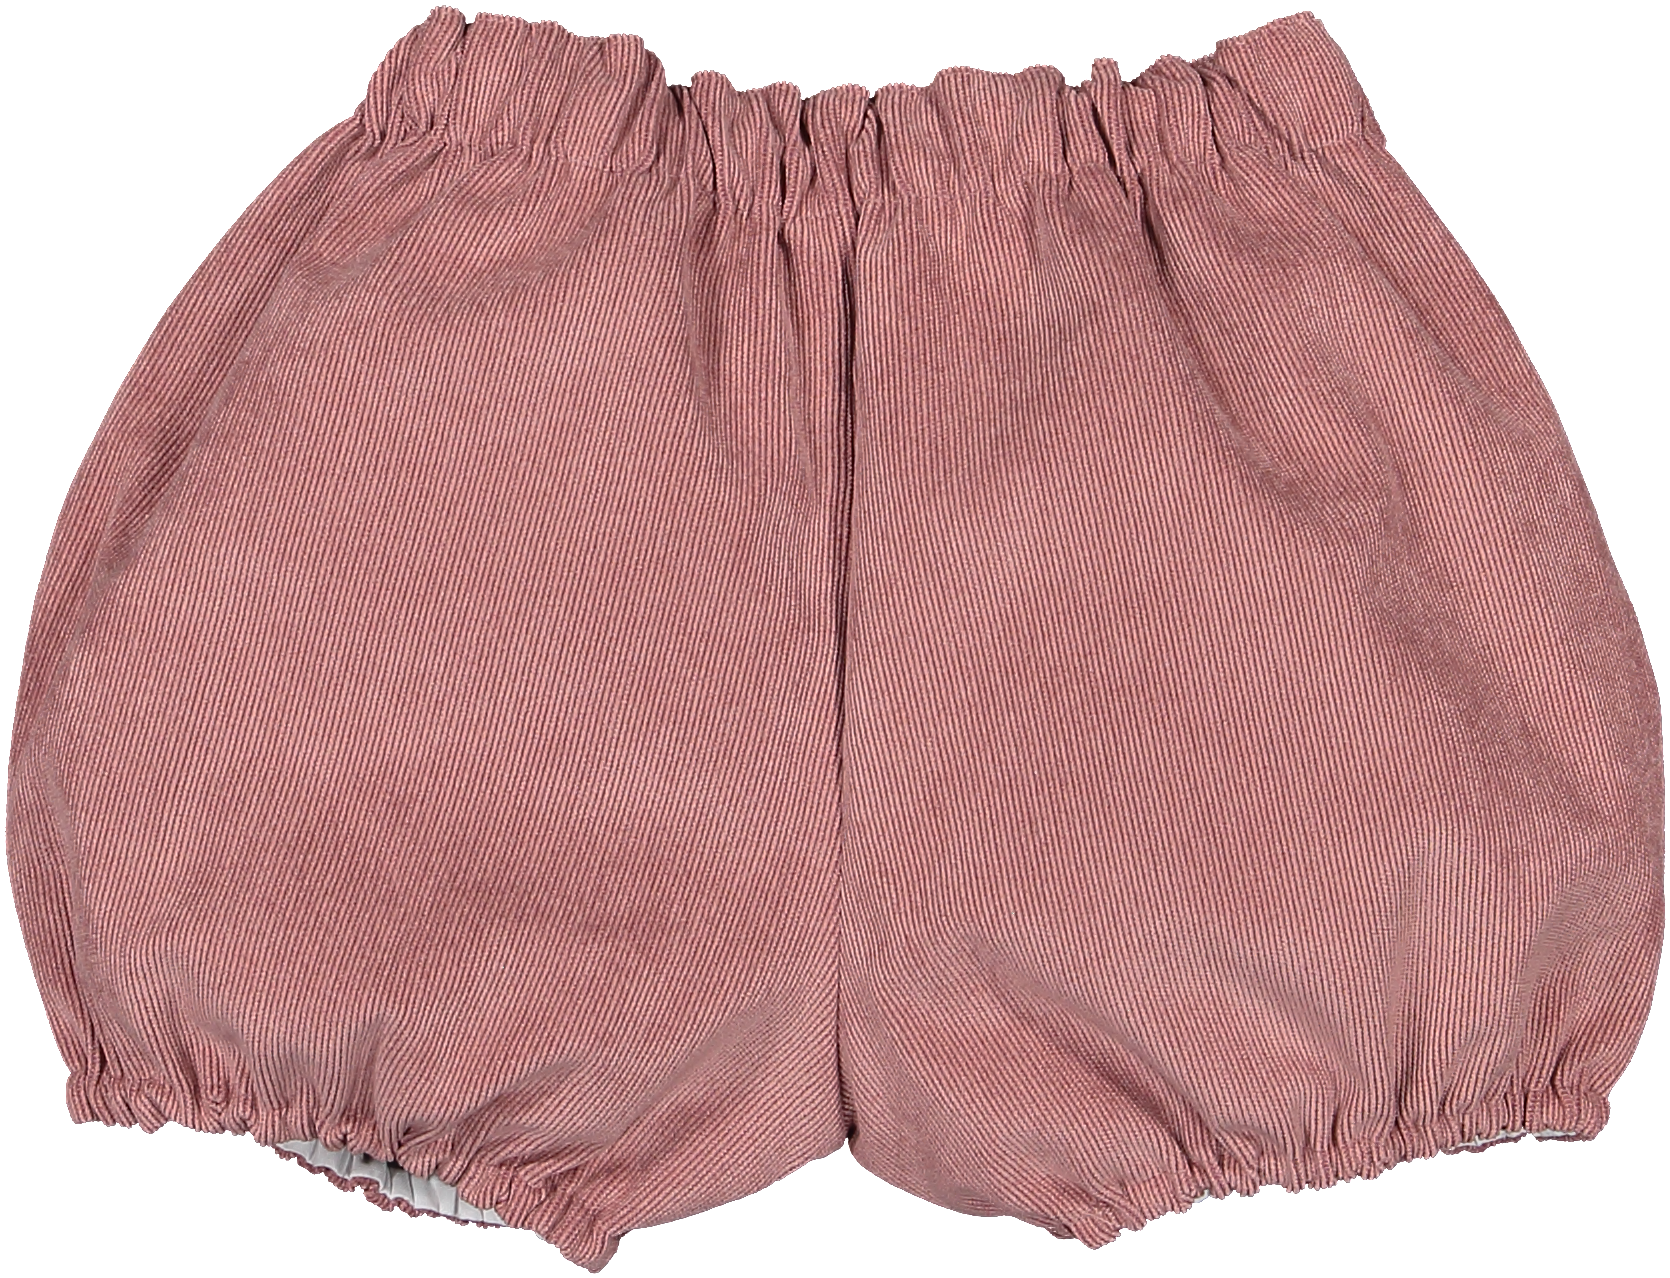 Mauve corduroy girls bubble shorts with button enclosure and gathered banding on legs by Sal & Pimenta.